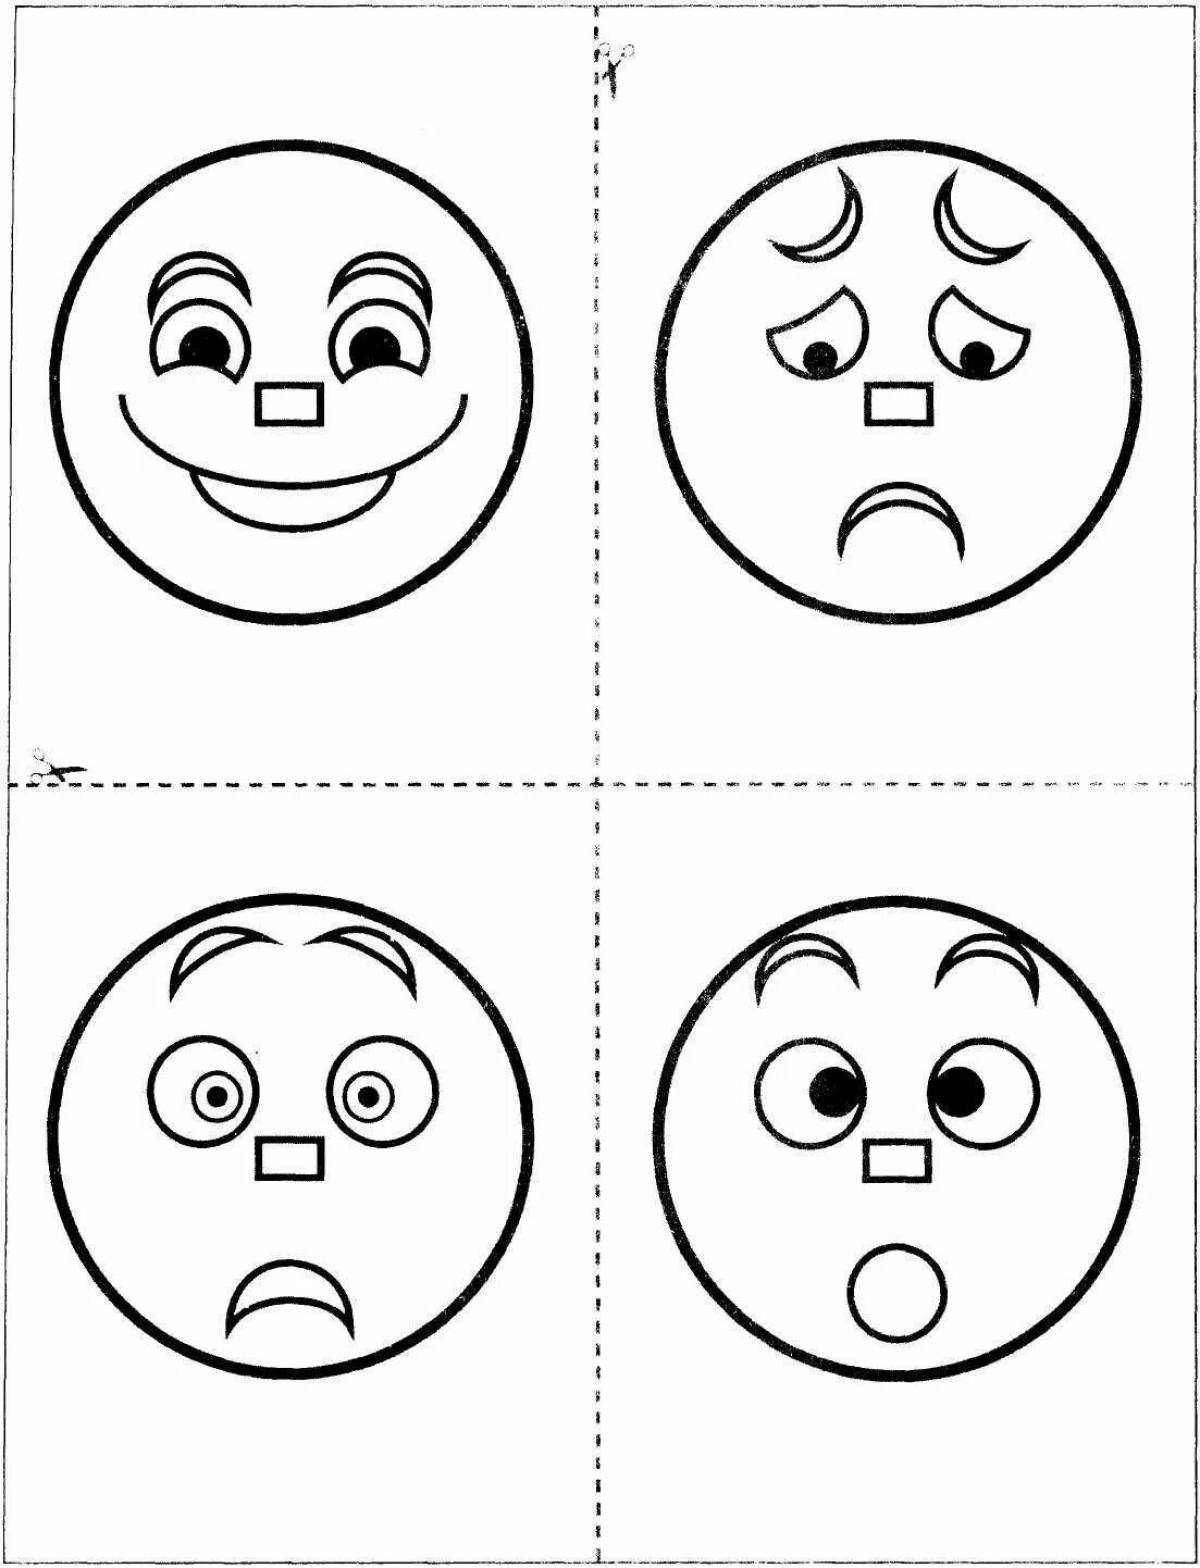 Witty emotion coloring pages for preschoolers